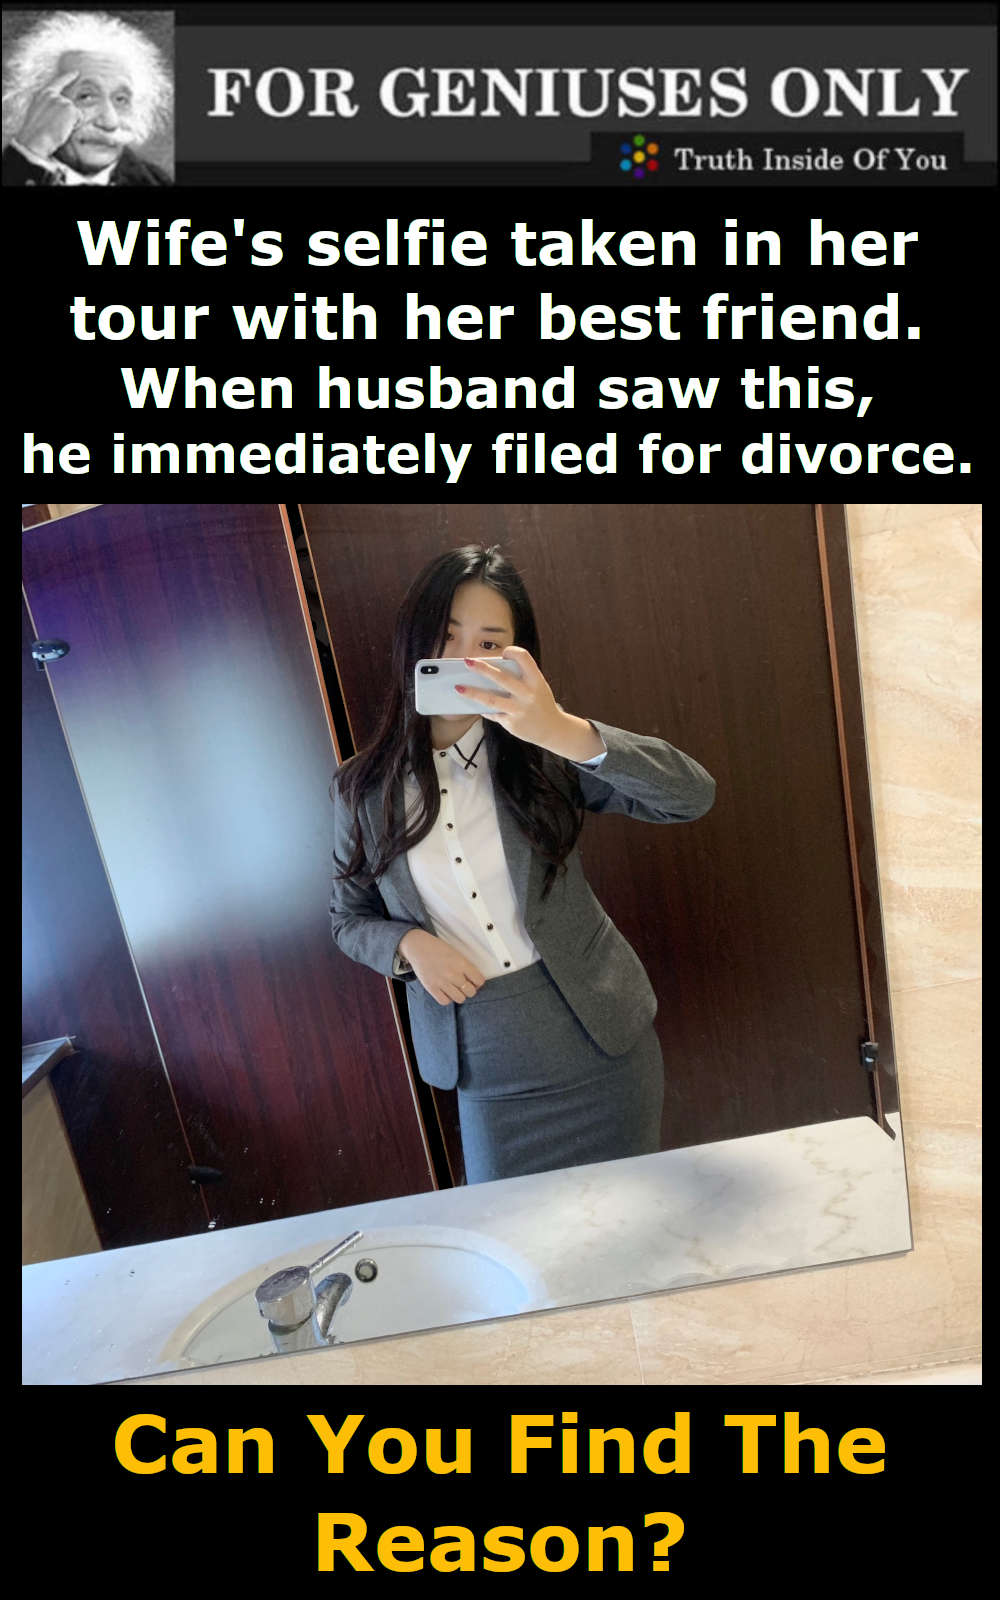 Wife's selfie taken in her tour with her best friend, When husband saw this, he immediately filed for divorce. Can You Find The Reason?